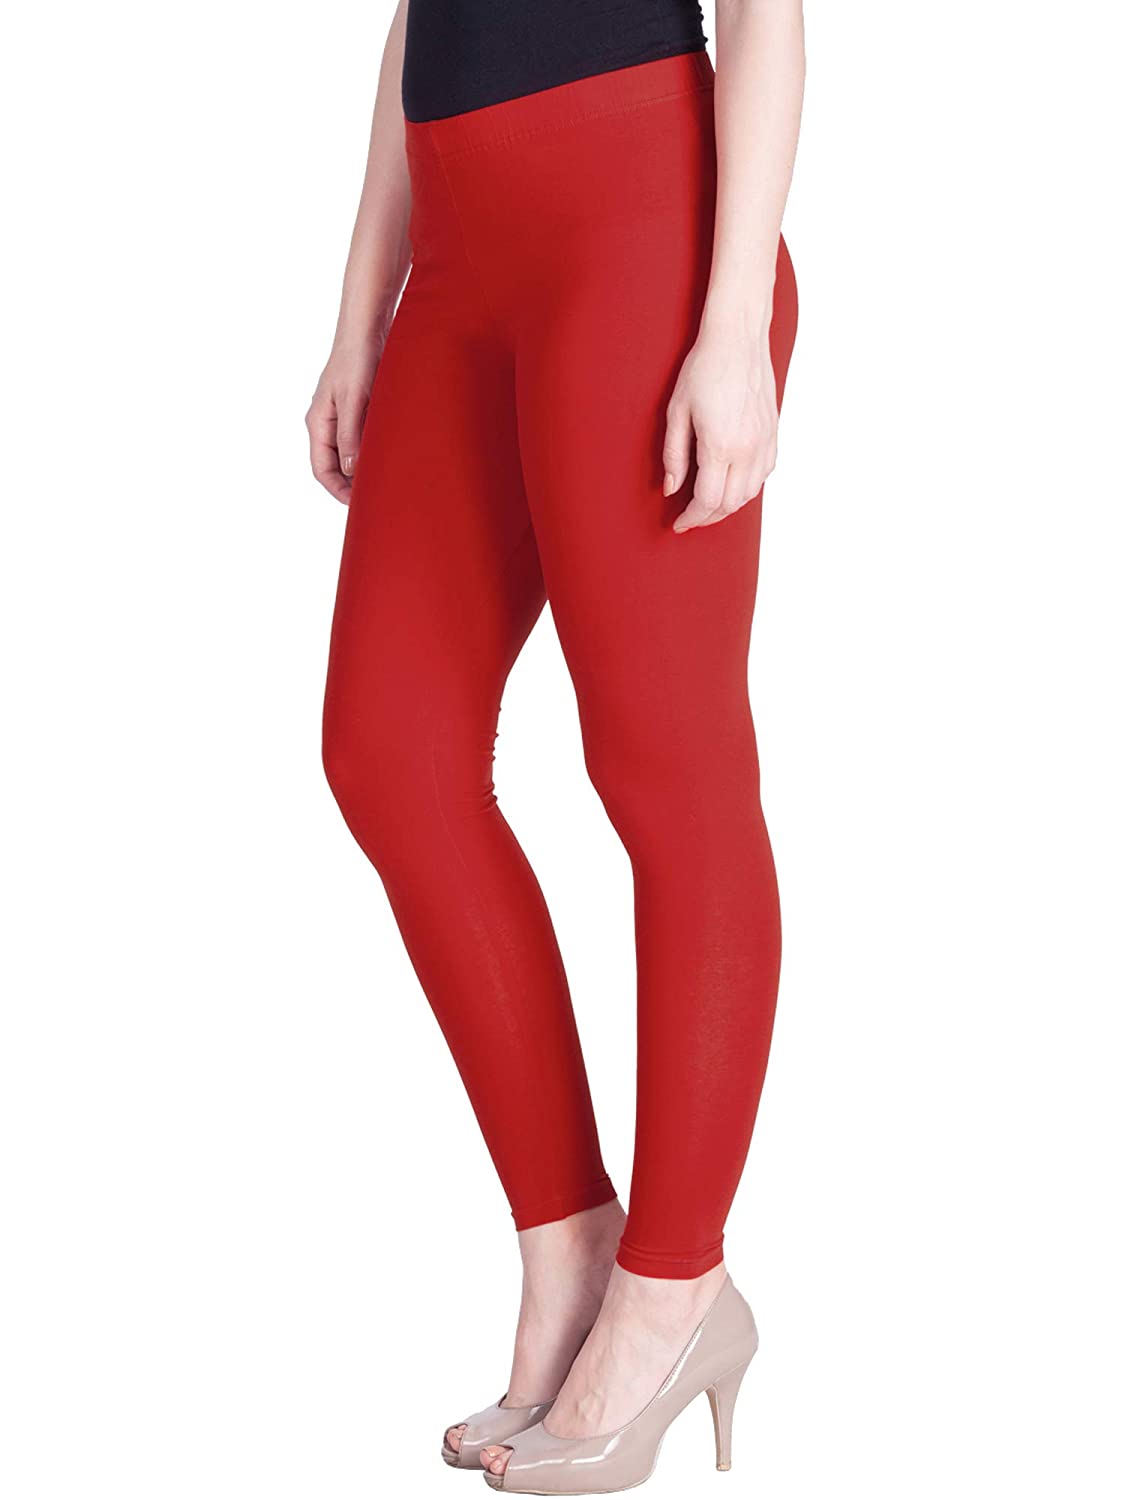 Lux Lyra Ankle Length Red Leggings free Size for Woman - Stilento